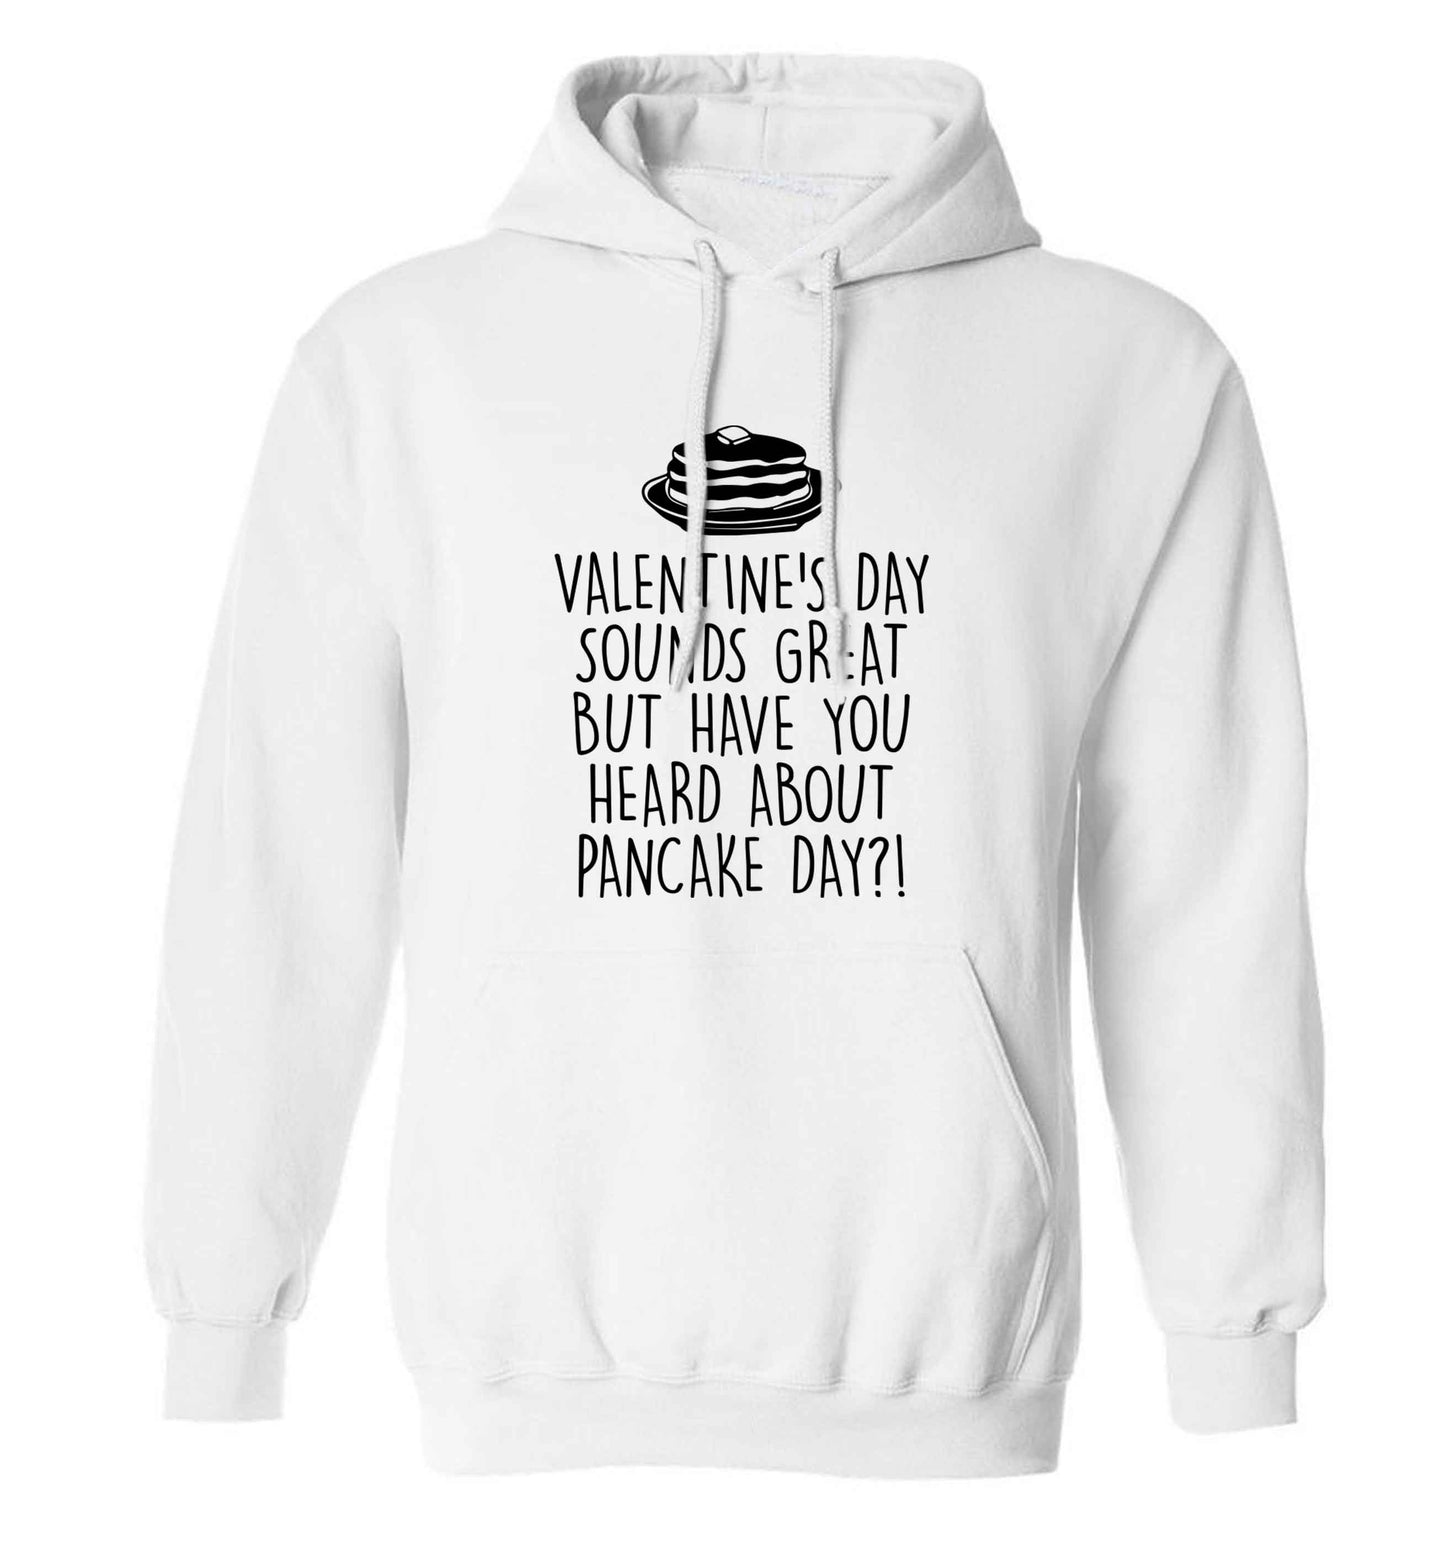 Valentine's day sounds great but have you heard about pancake day?! adults unisex white hoodie 2XL